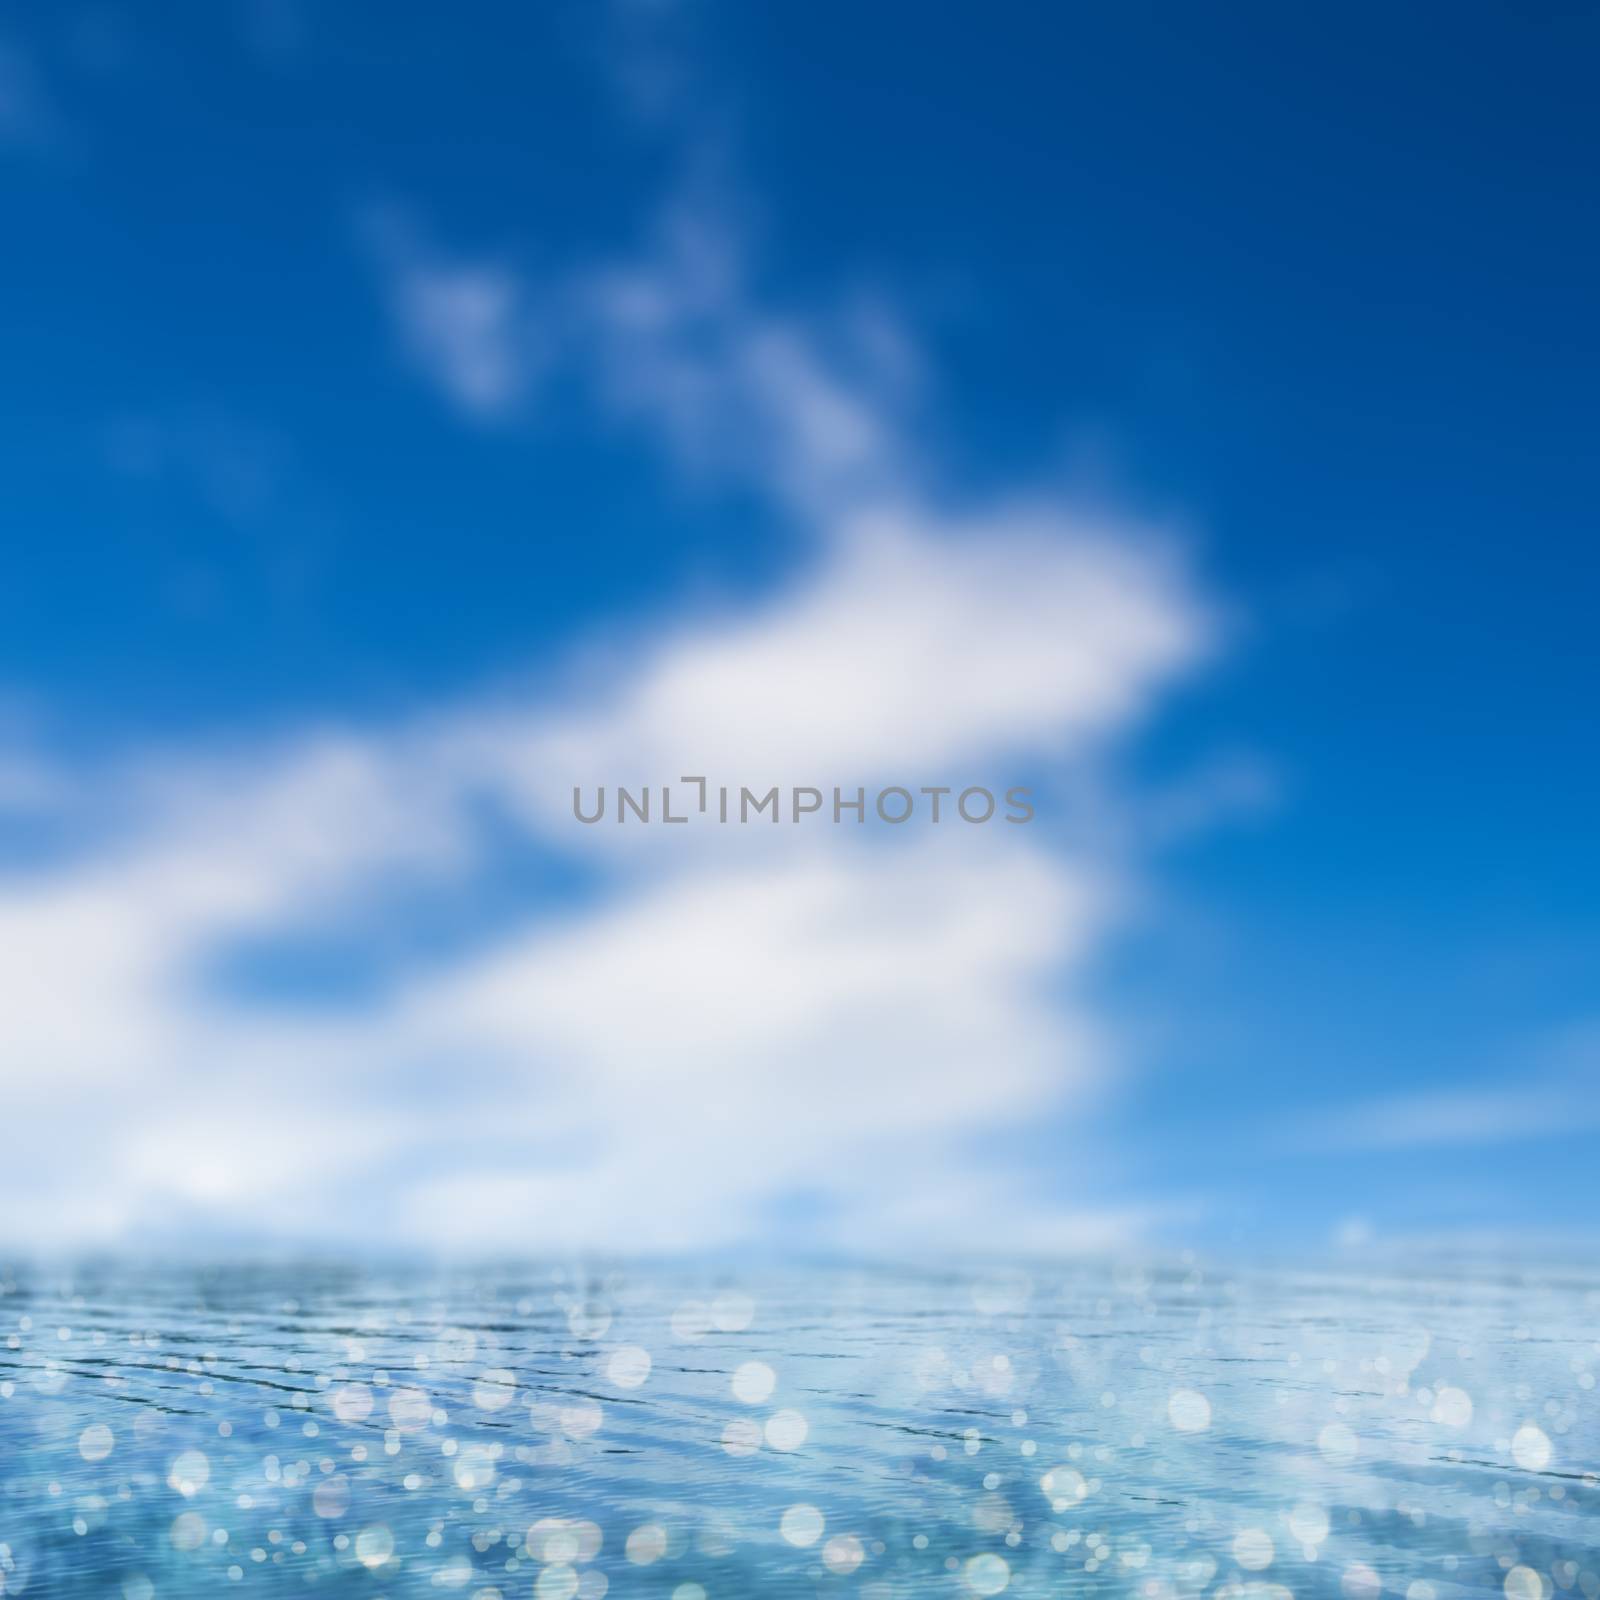 Illustration of a blue background image with ocean